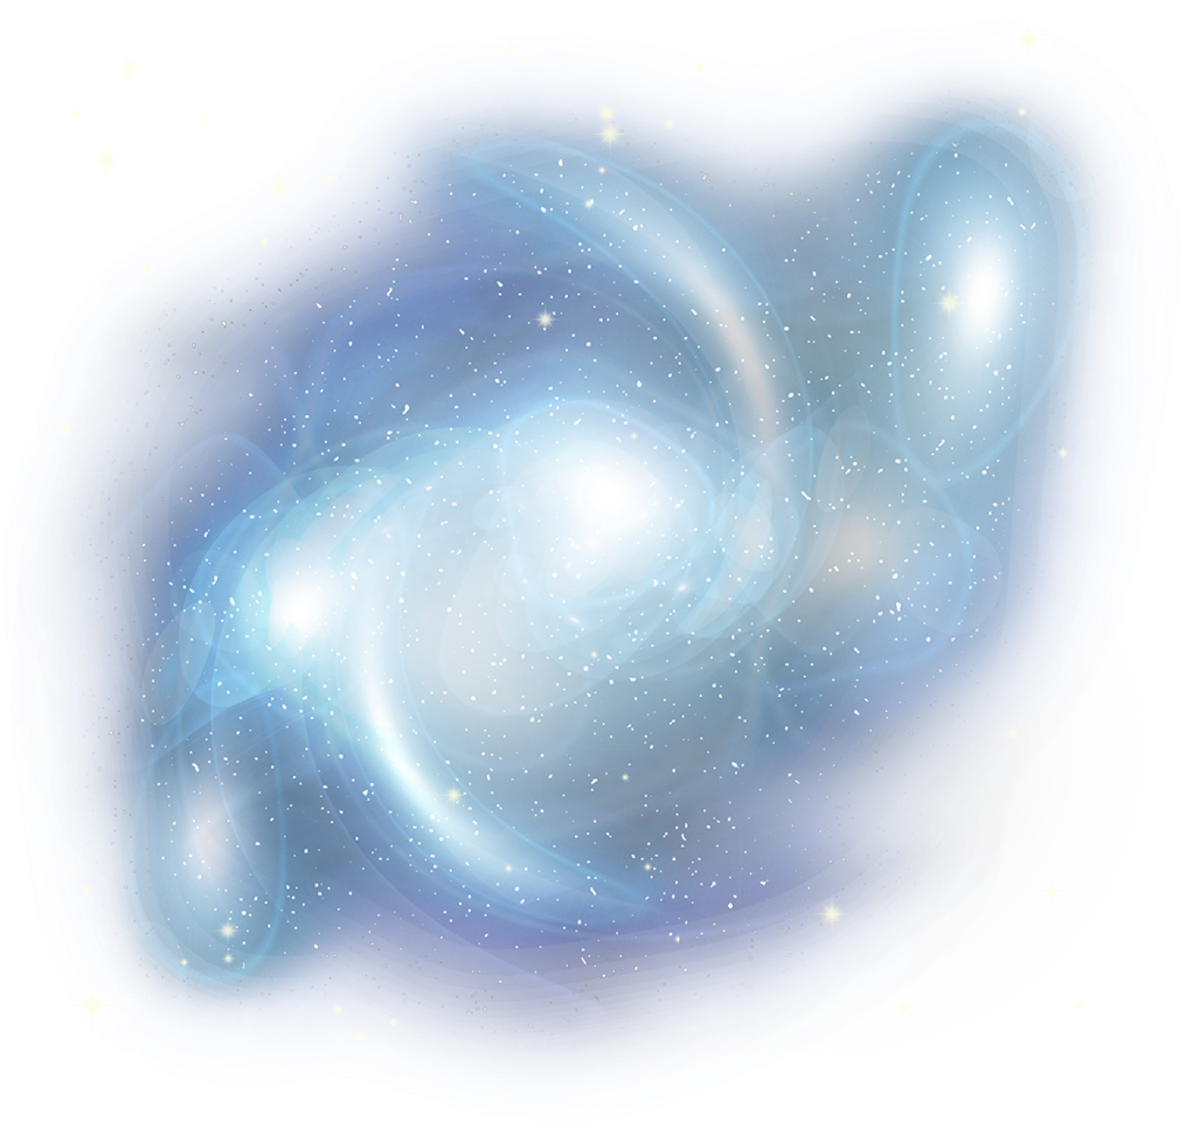 10-900-galaxy-clipart-illustrations-royalty-free-vector-graphics